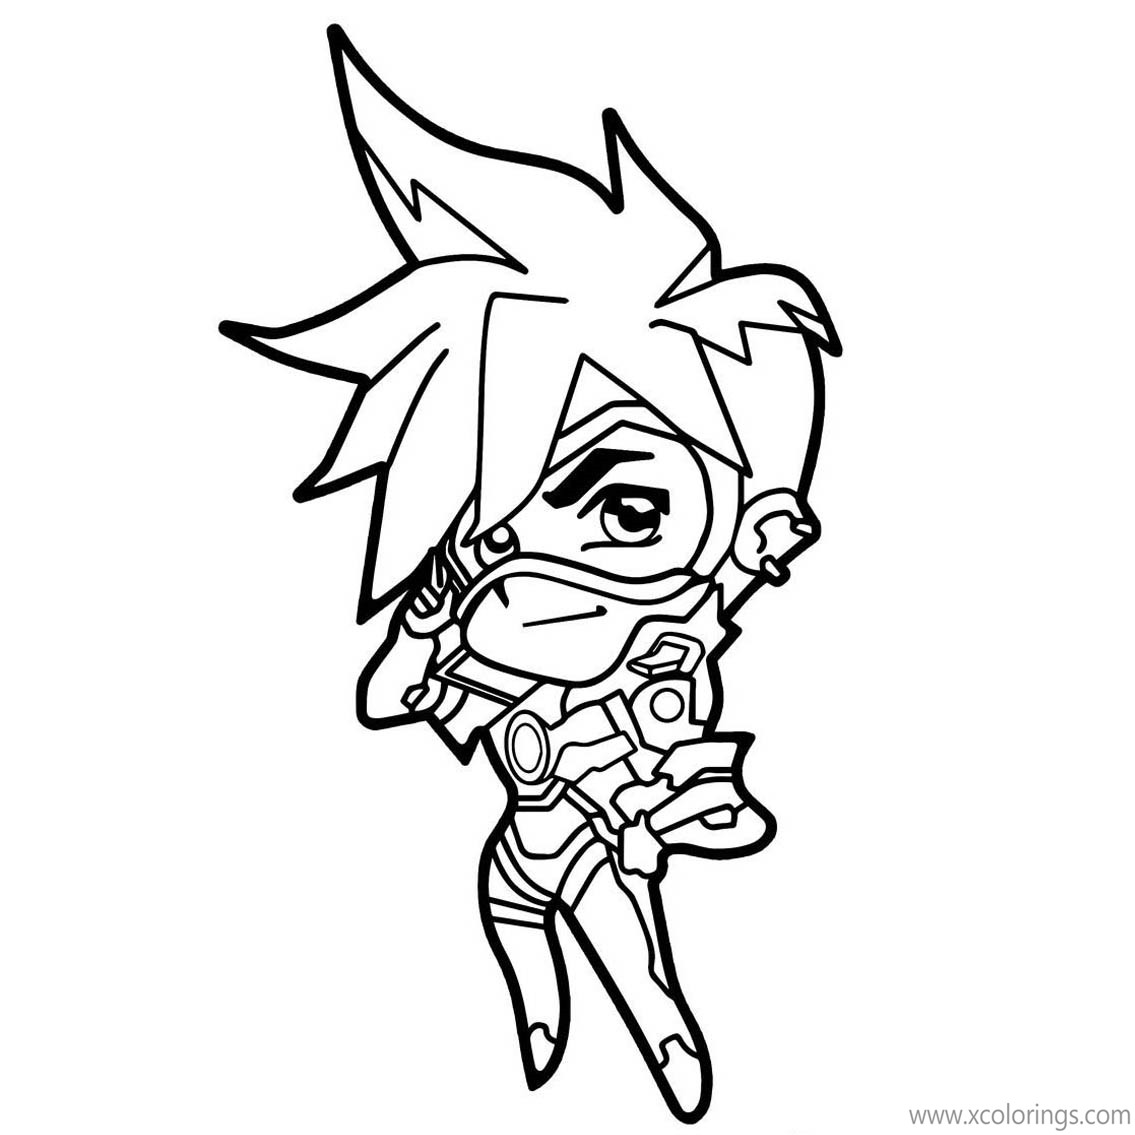 Free Overwatch Coloring Pages Cute Tracer printable